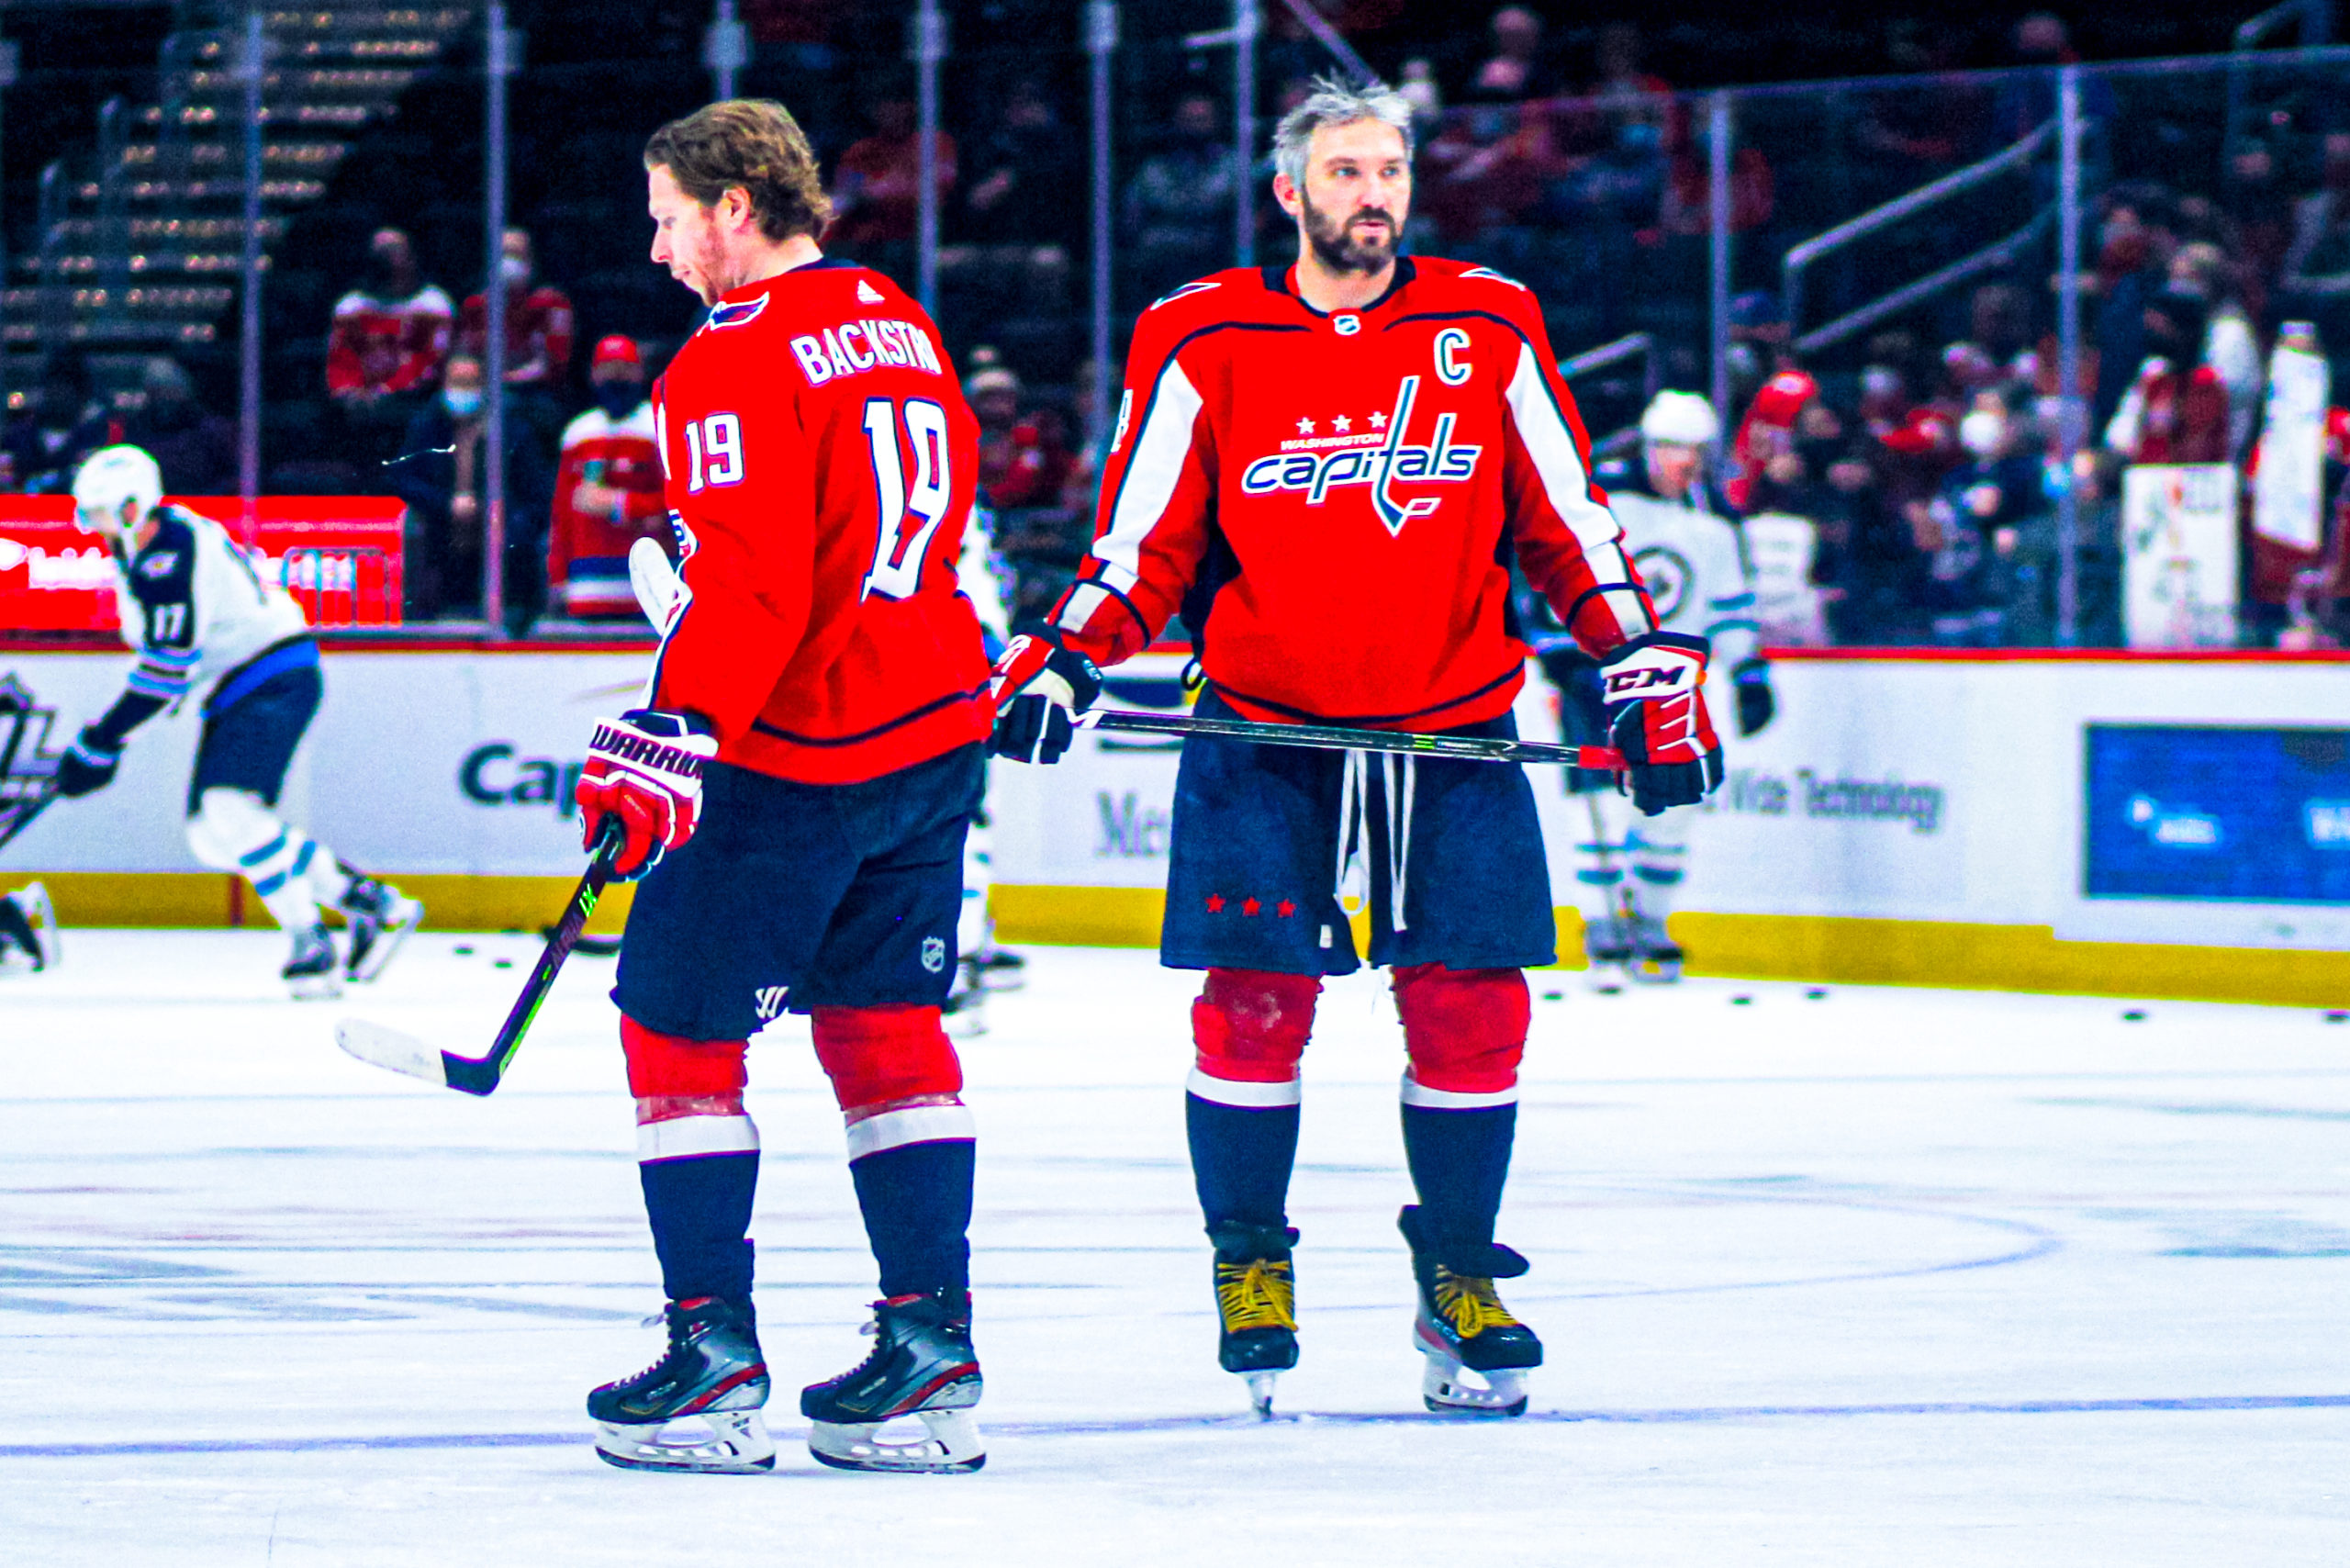 Capitals center Nicklas Backstrom and left wing Alex Ovechkin